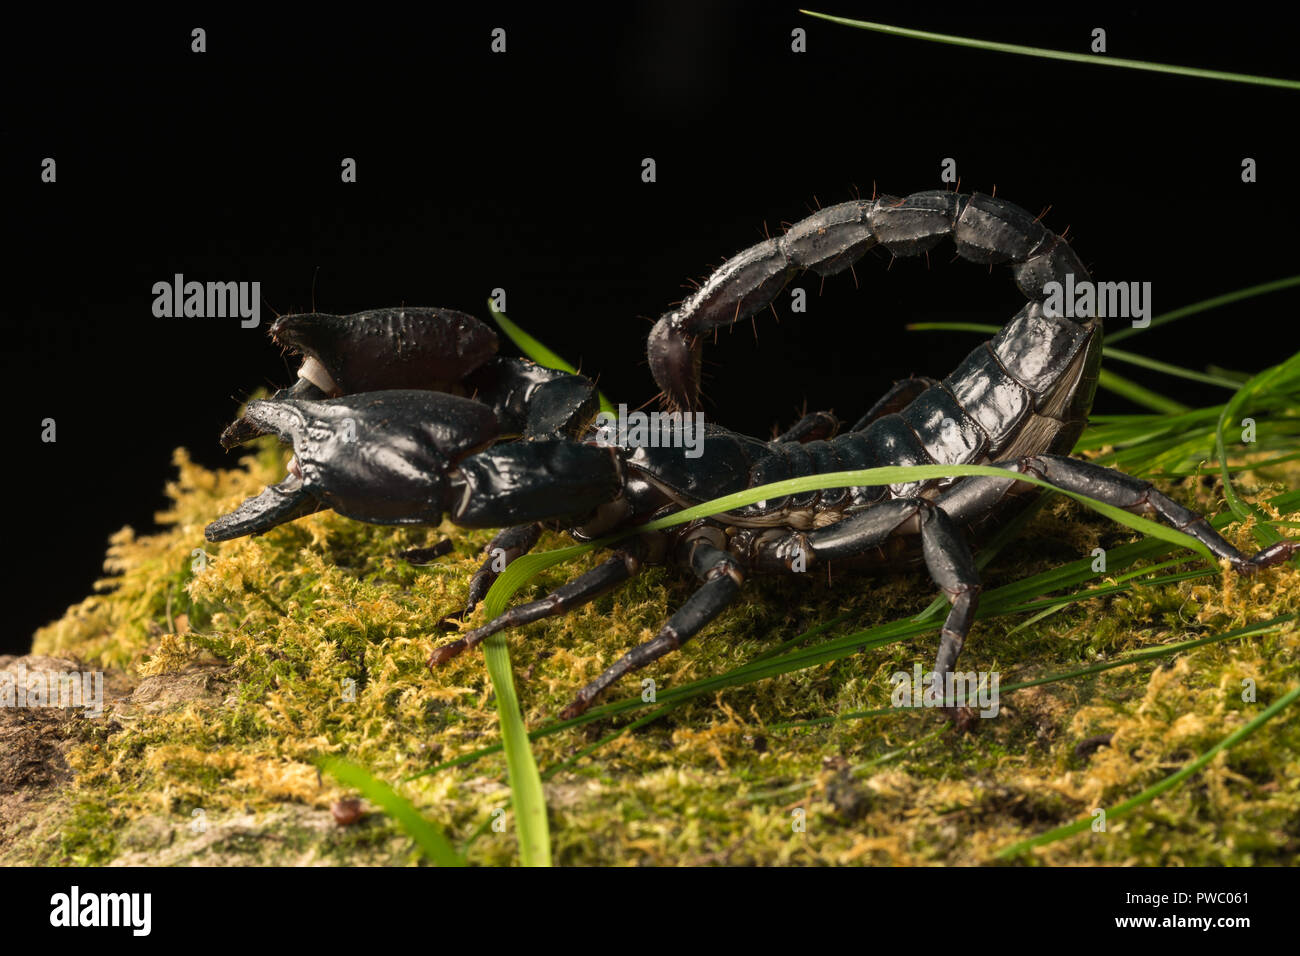 Emperor scorpion (Pandinus imperator), a species of scorpion native to rainforests and savannas in West Africa Stock Photo